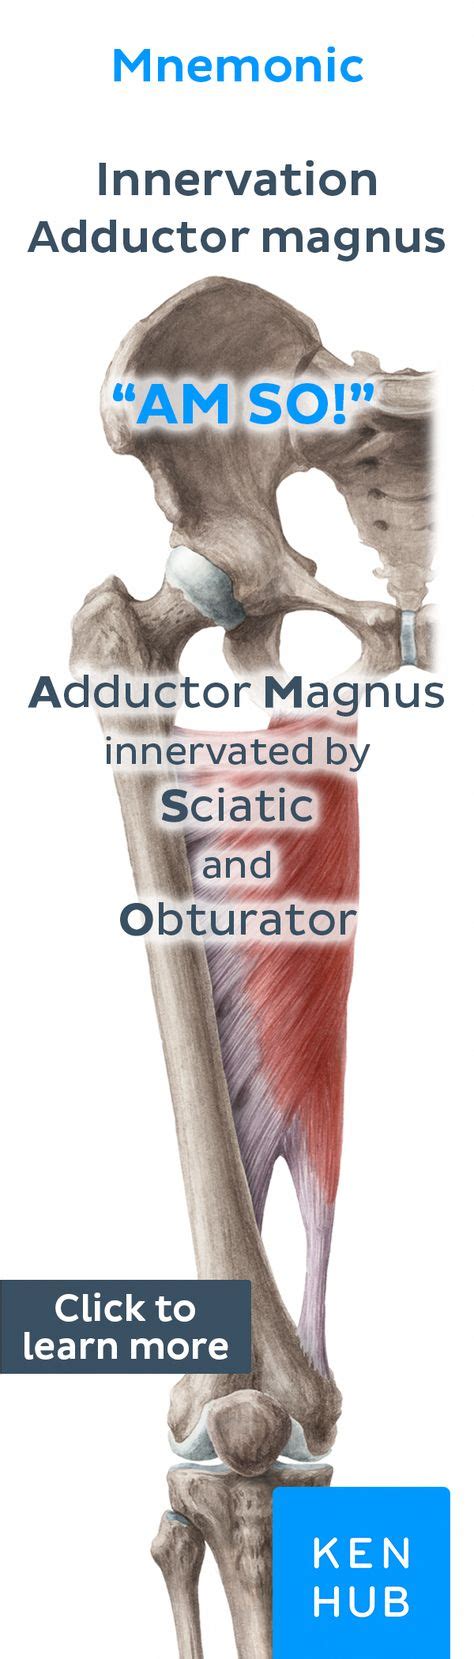 Hip Adductors With Images Physical Therapy School Anatomy And